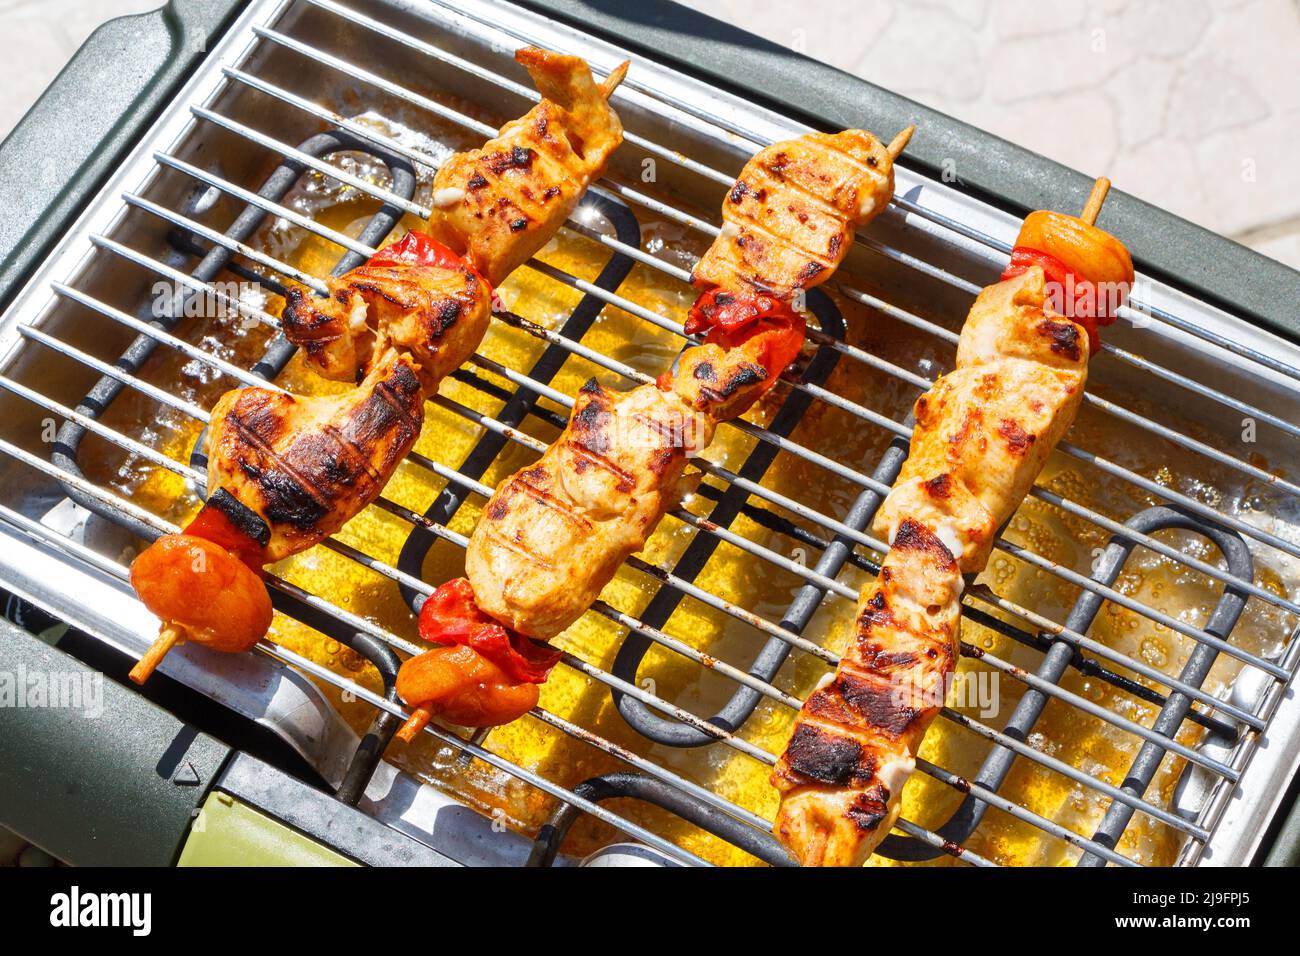 Marinated chicken brochette on electric barbecue Stock Photo